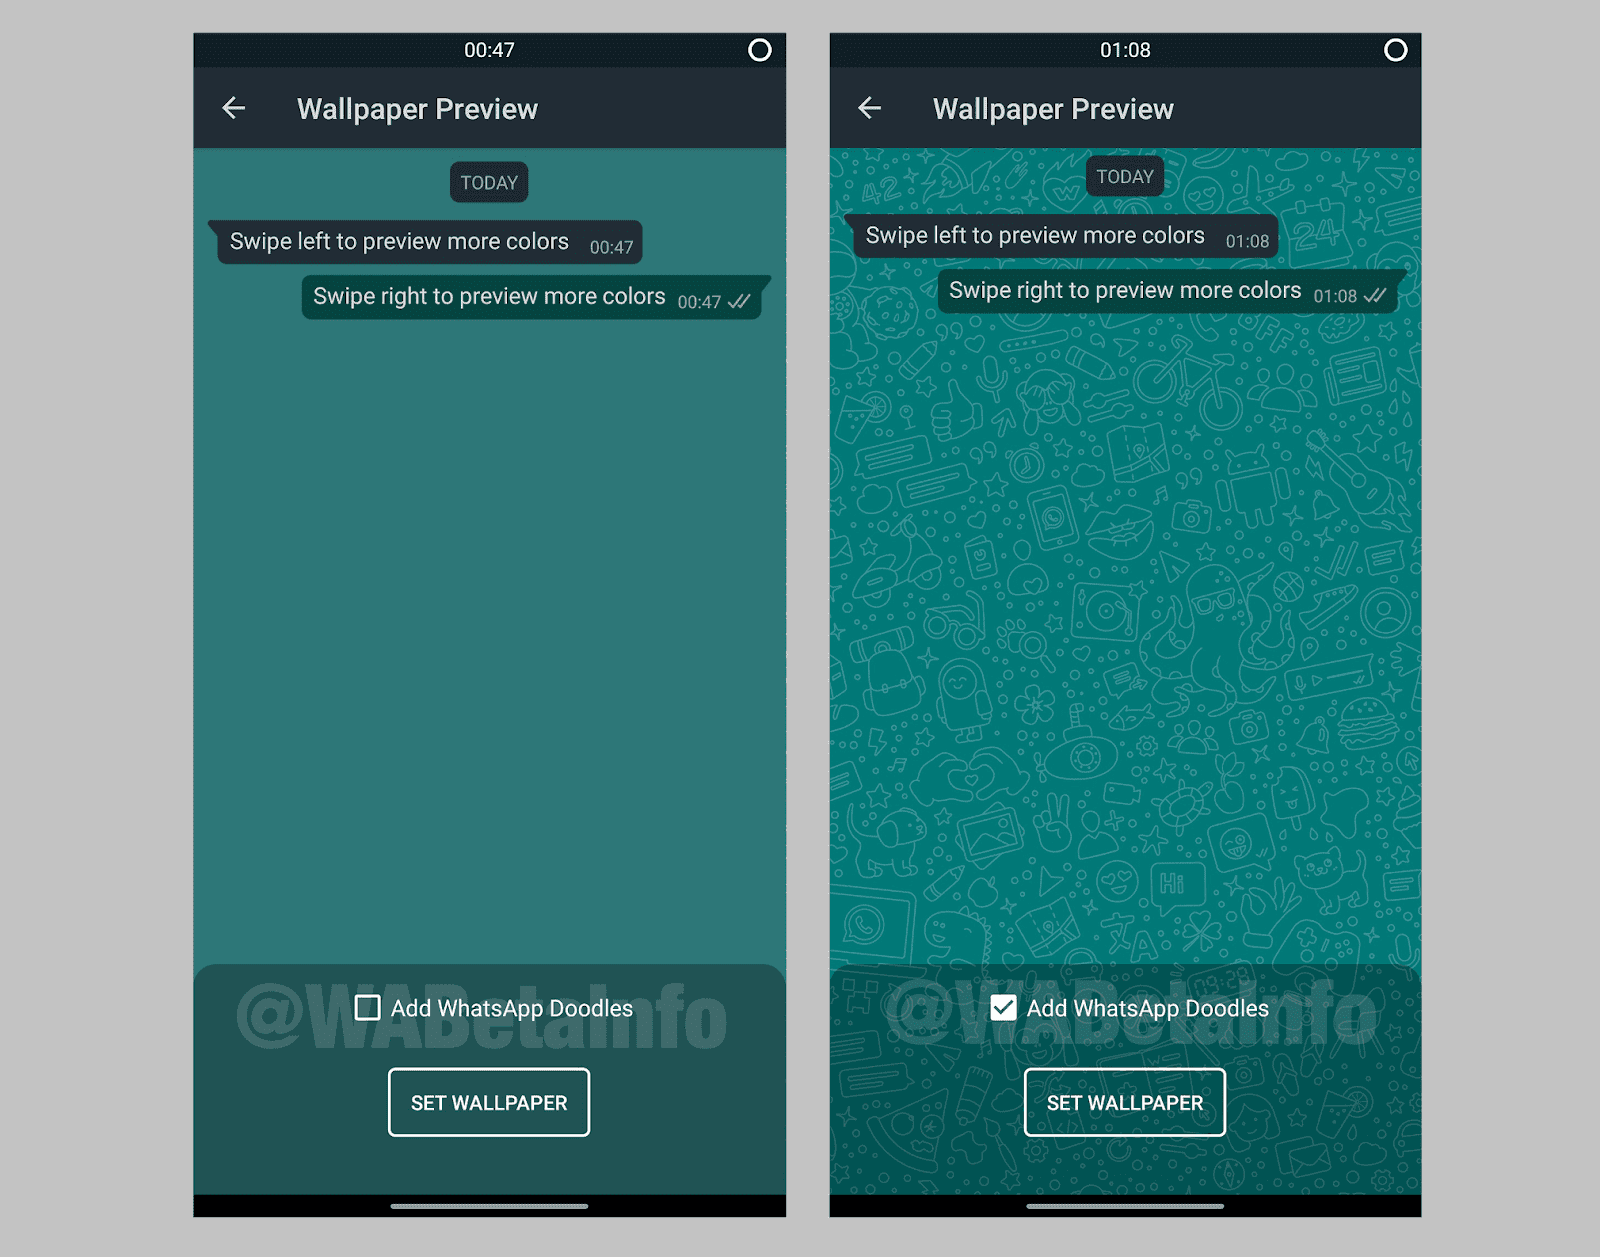 New improvements from wallpaper doodling to new call button and addition of  a business catalogue have been spotted in the latest WhatsApp beta /  Digital Information World